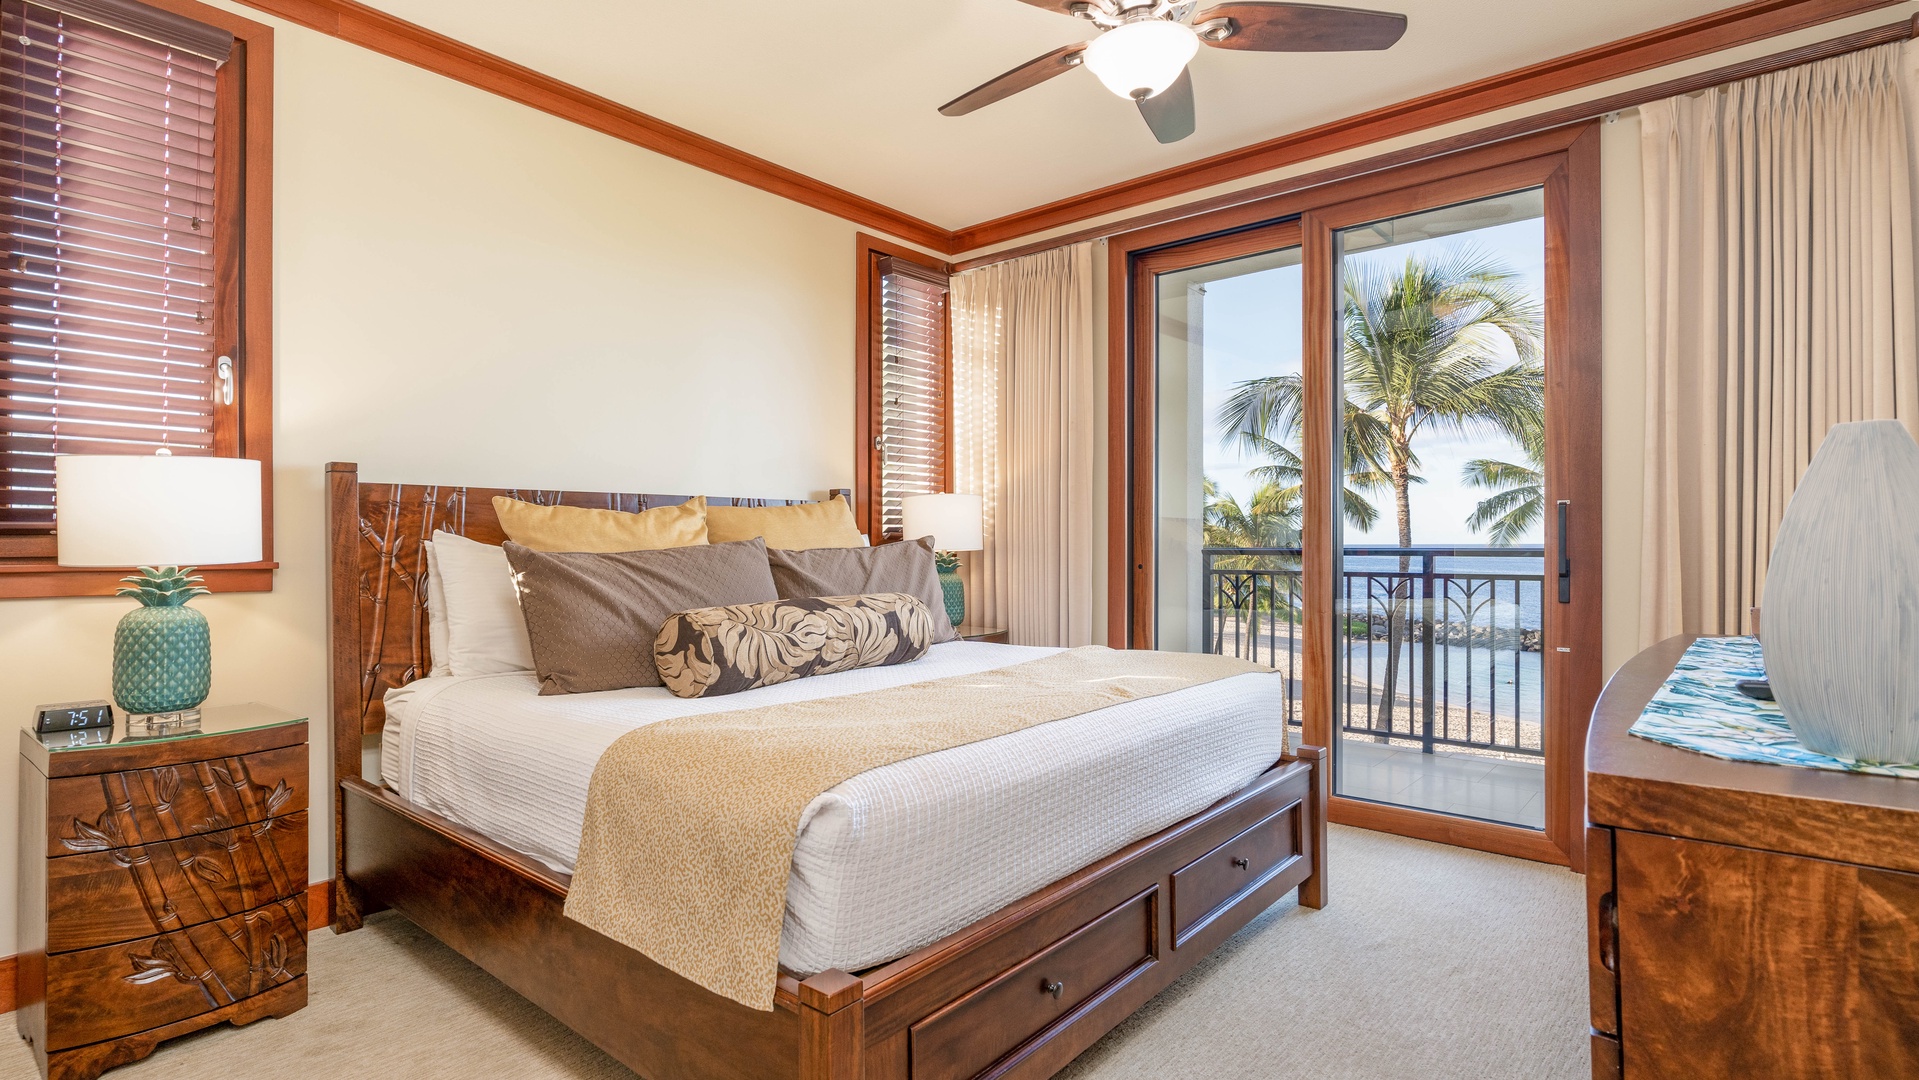 Kapolei Vacation Rentals, Ko Olina Beach Villas B309 - The primary guest bedroom with access to the lanai.